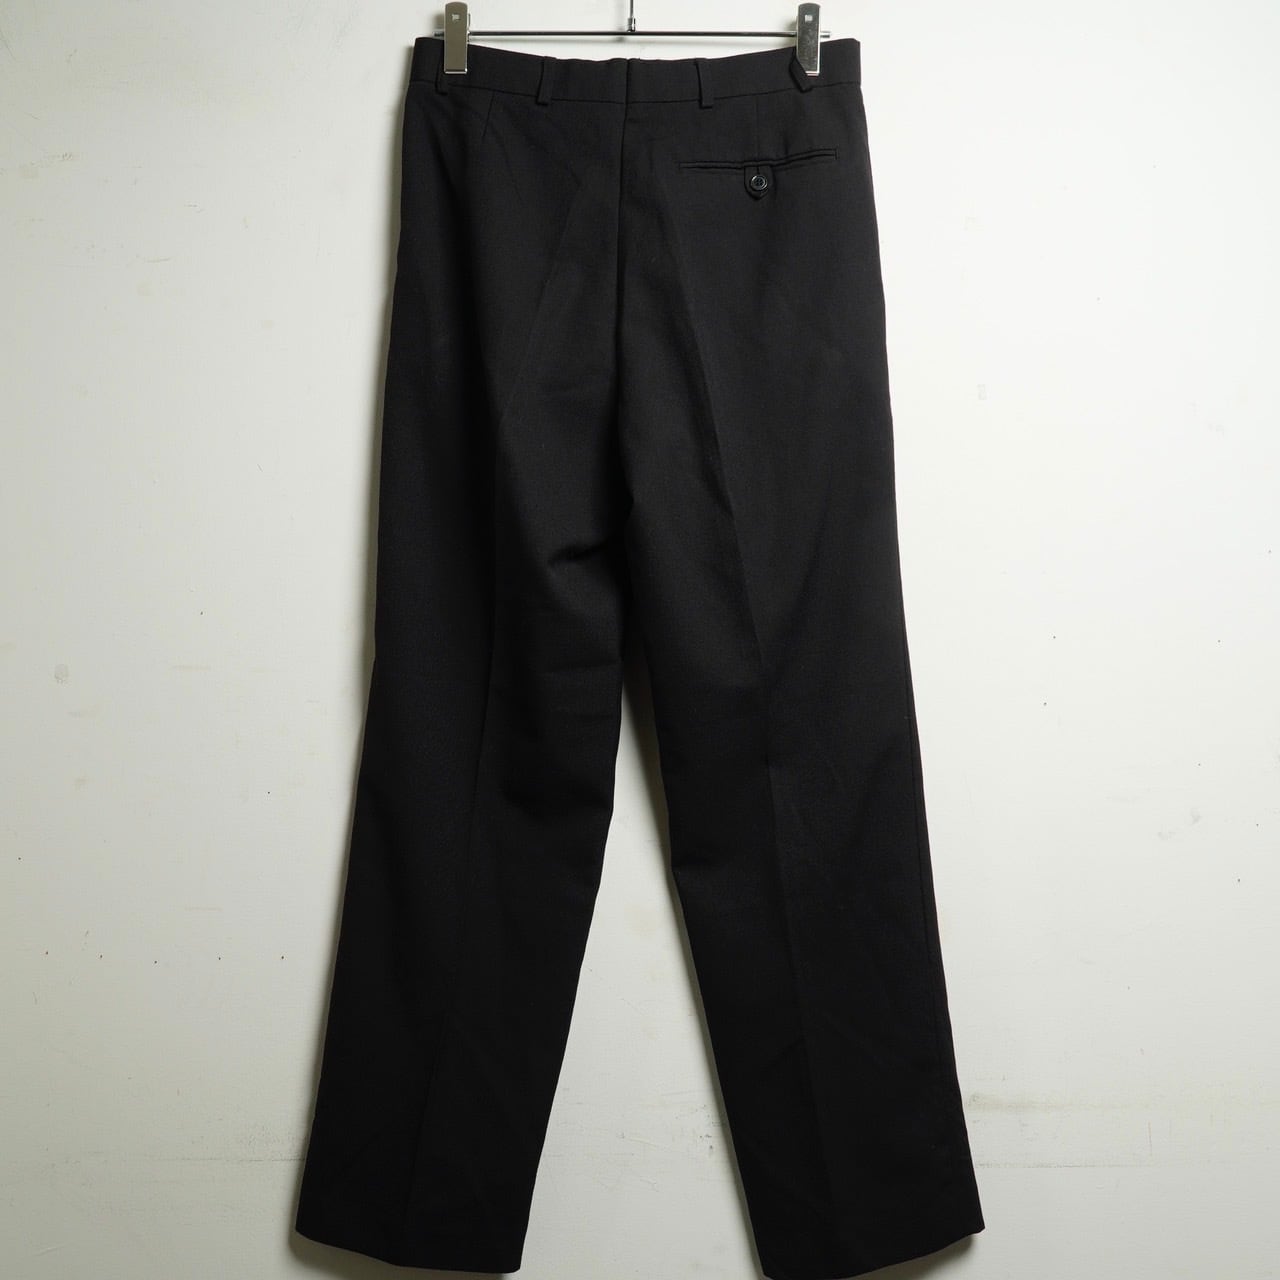 90s British army No,3 dress trousers